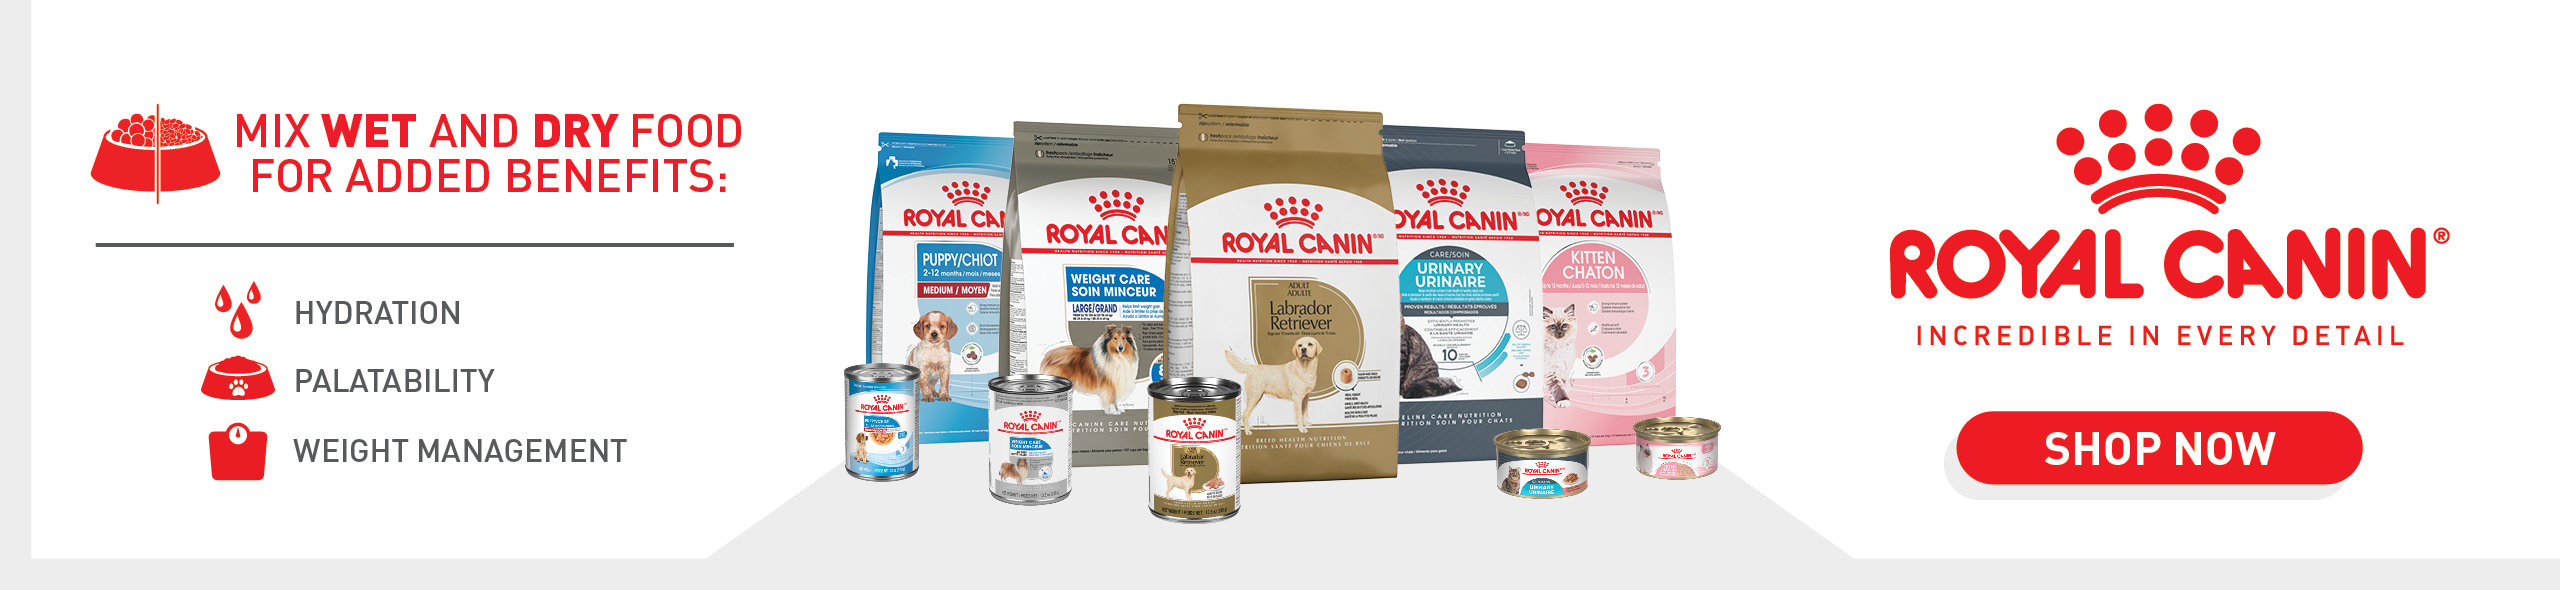 Royal Canin Shop Now